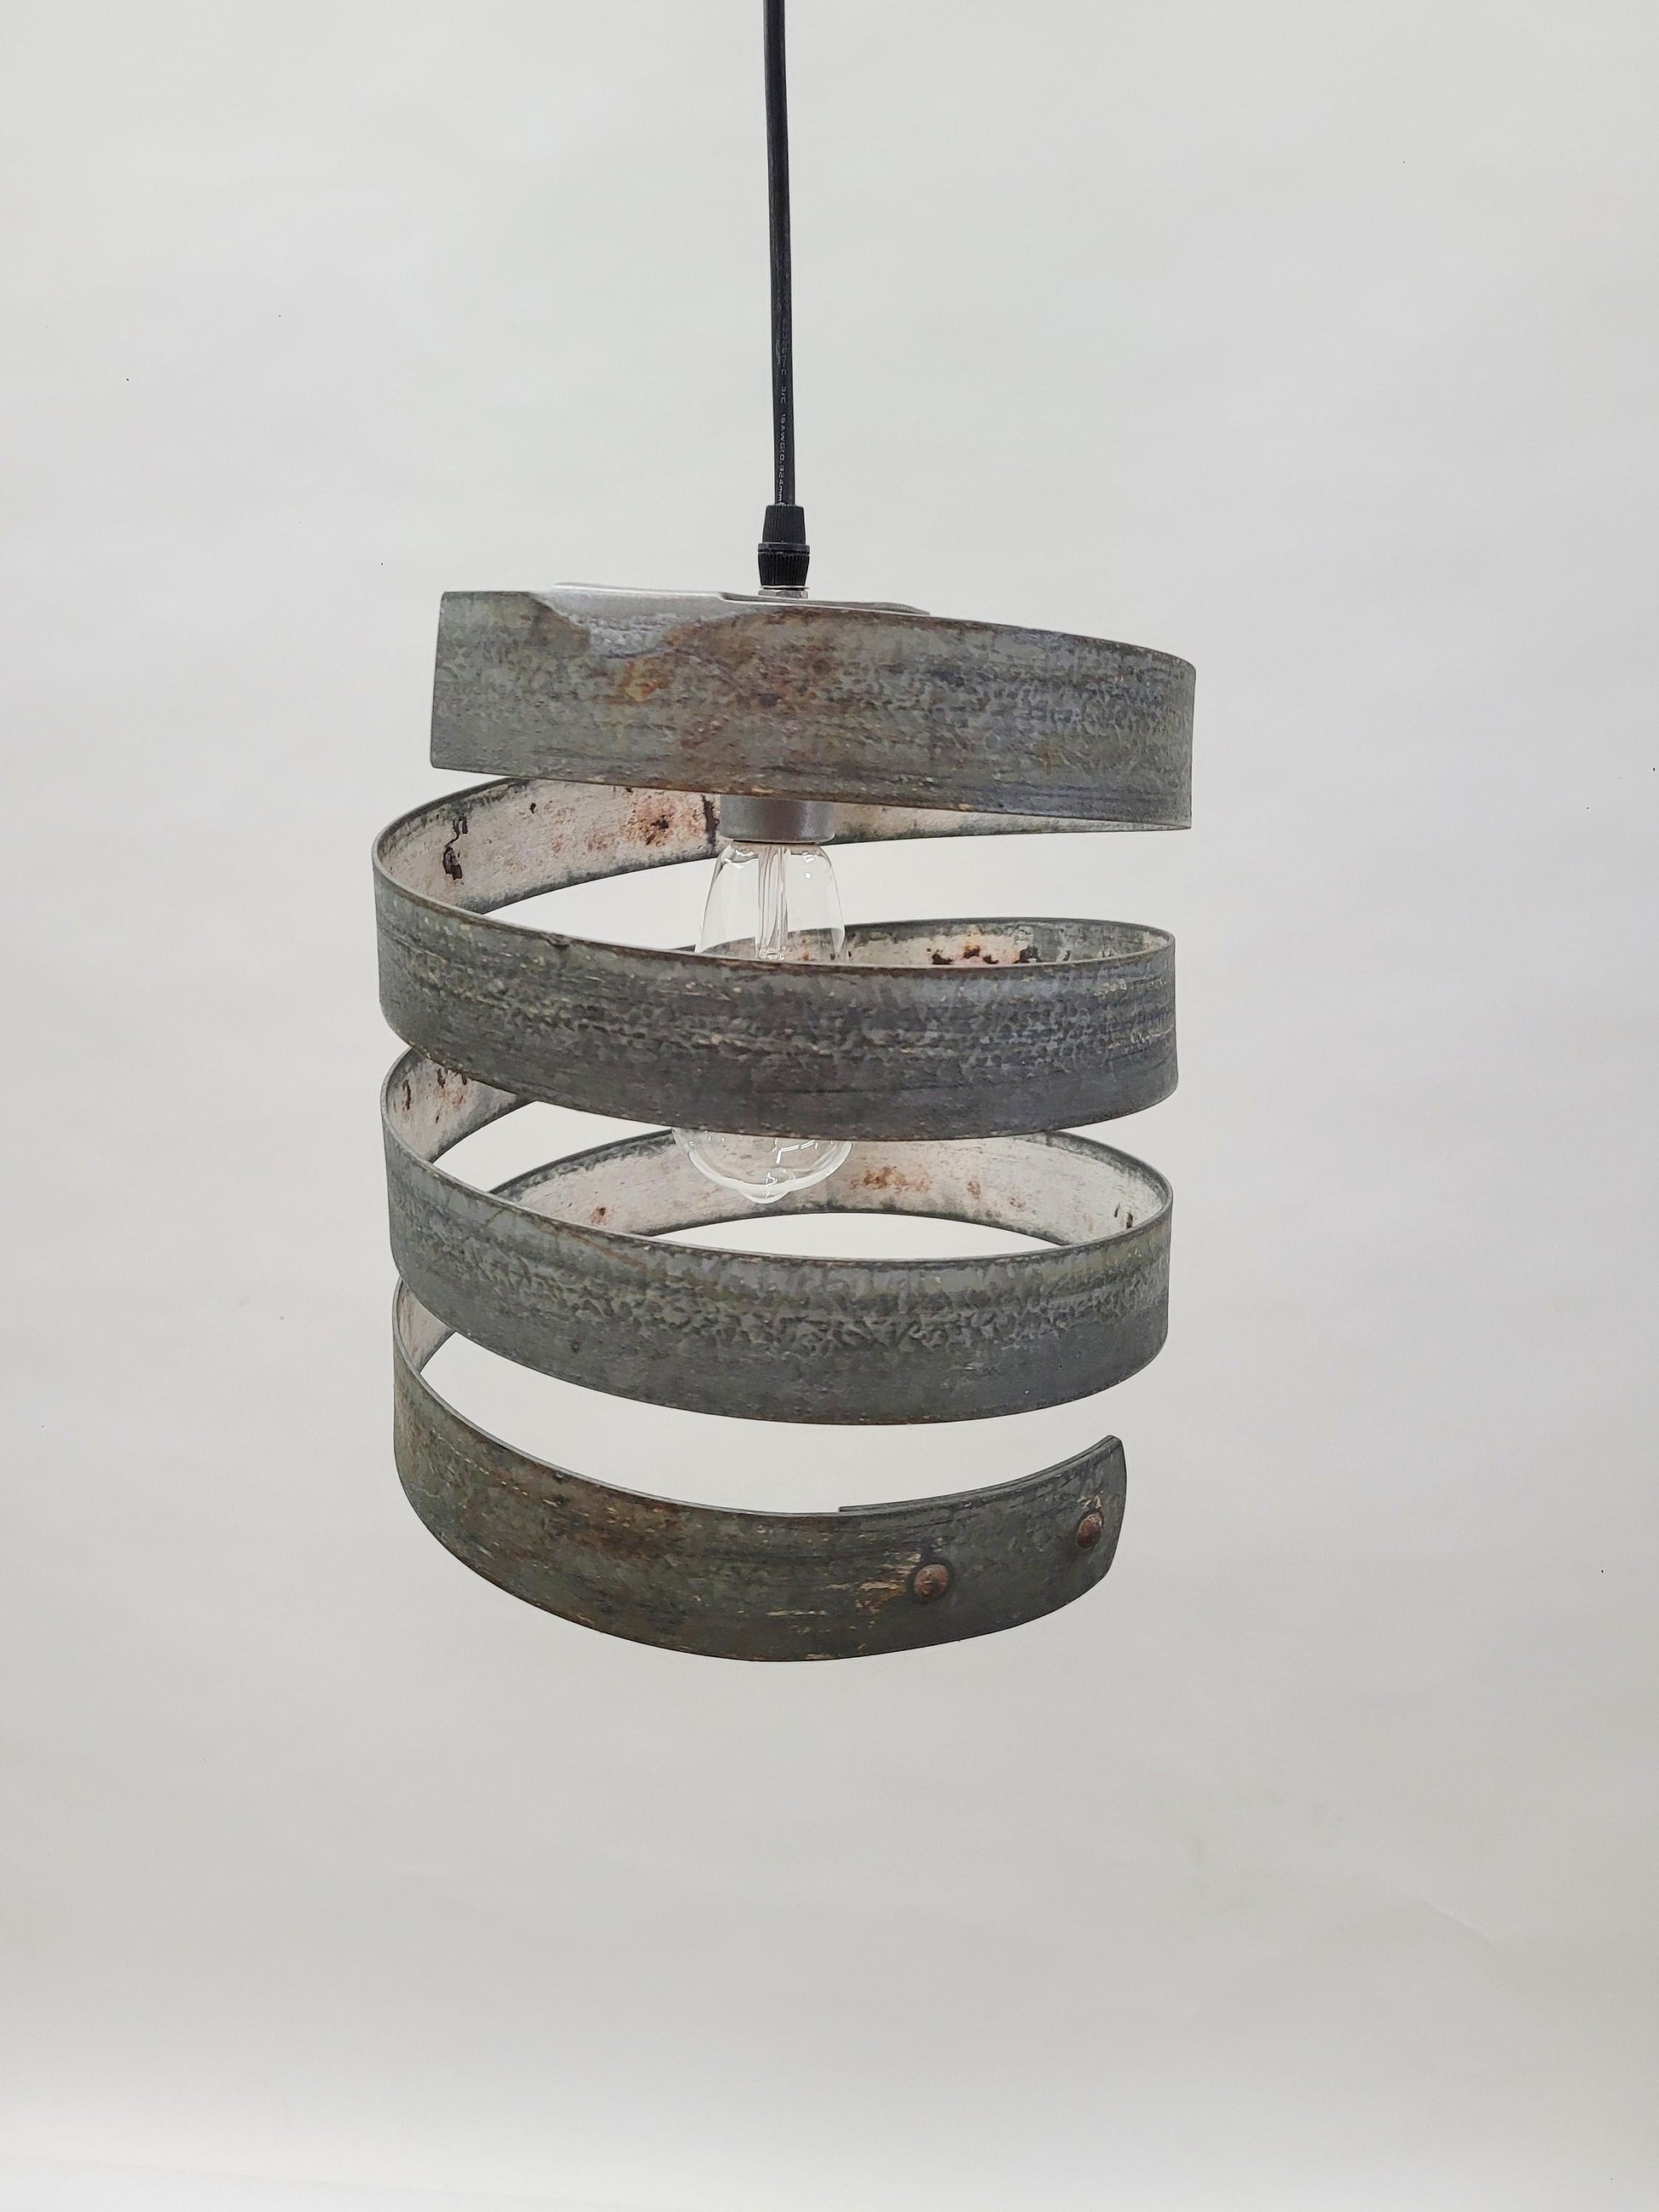 Wine Barrel Ring Pendant Light - TOHATRA 2 - Made from retired California wine barrel rings. 100% Recycled!